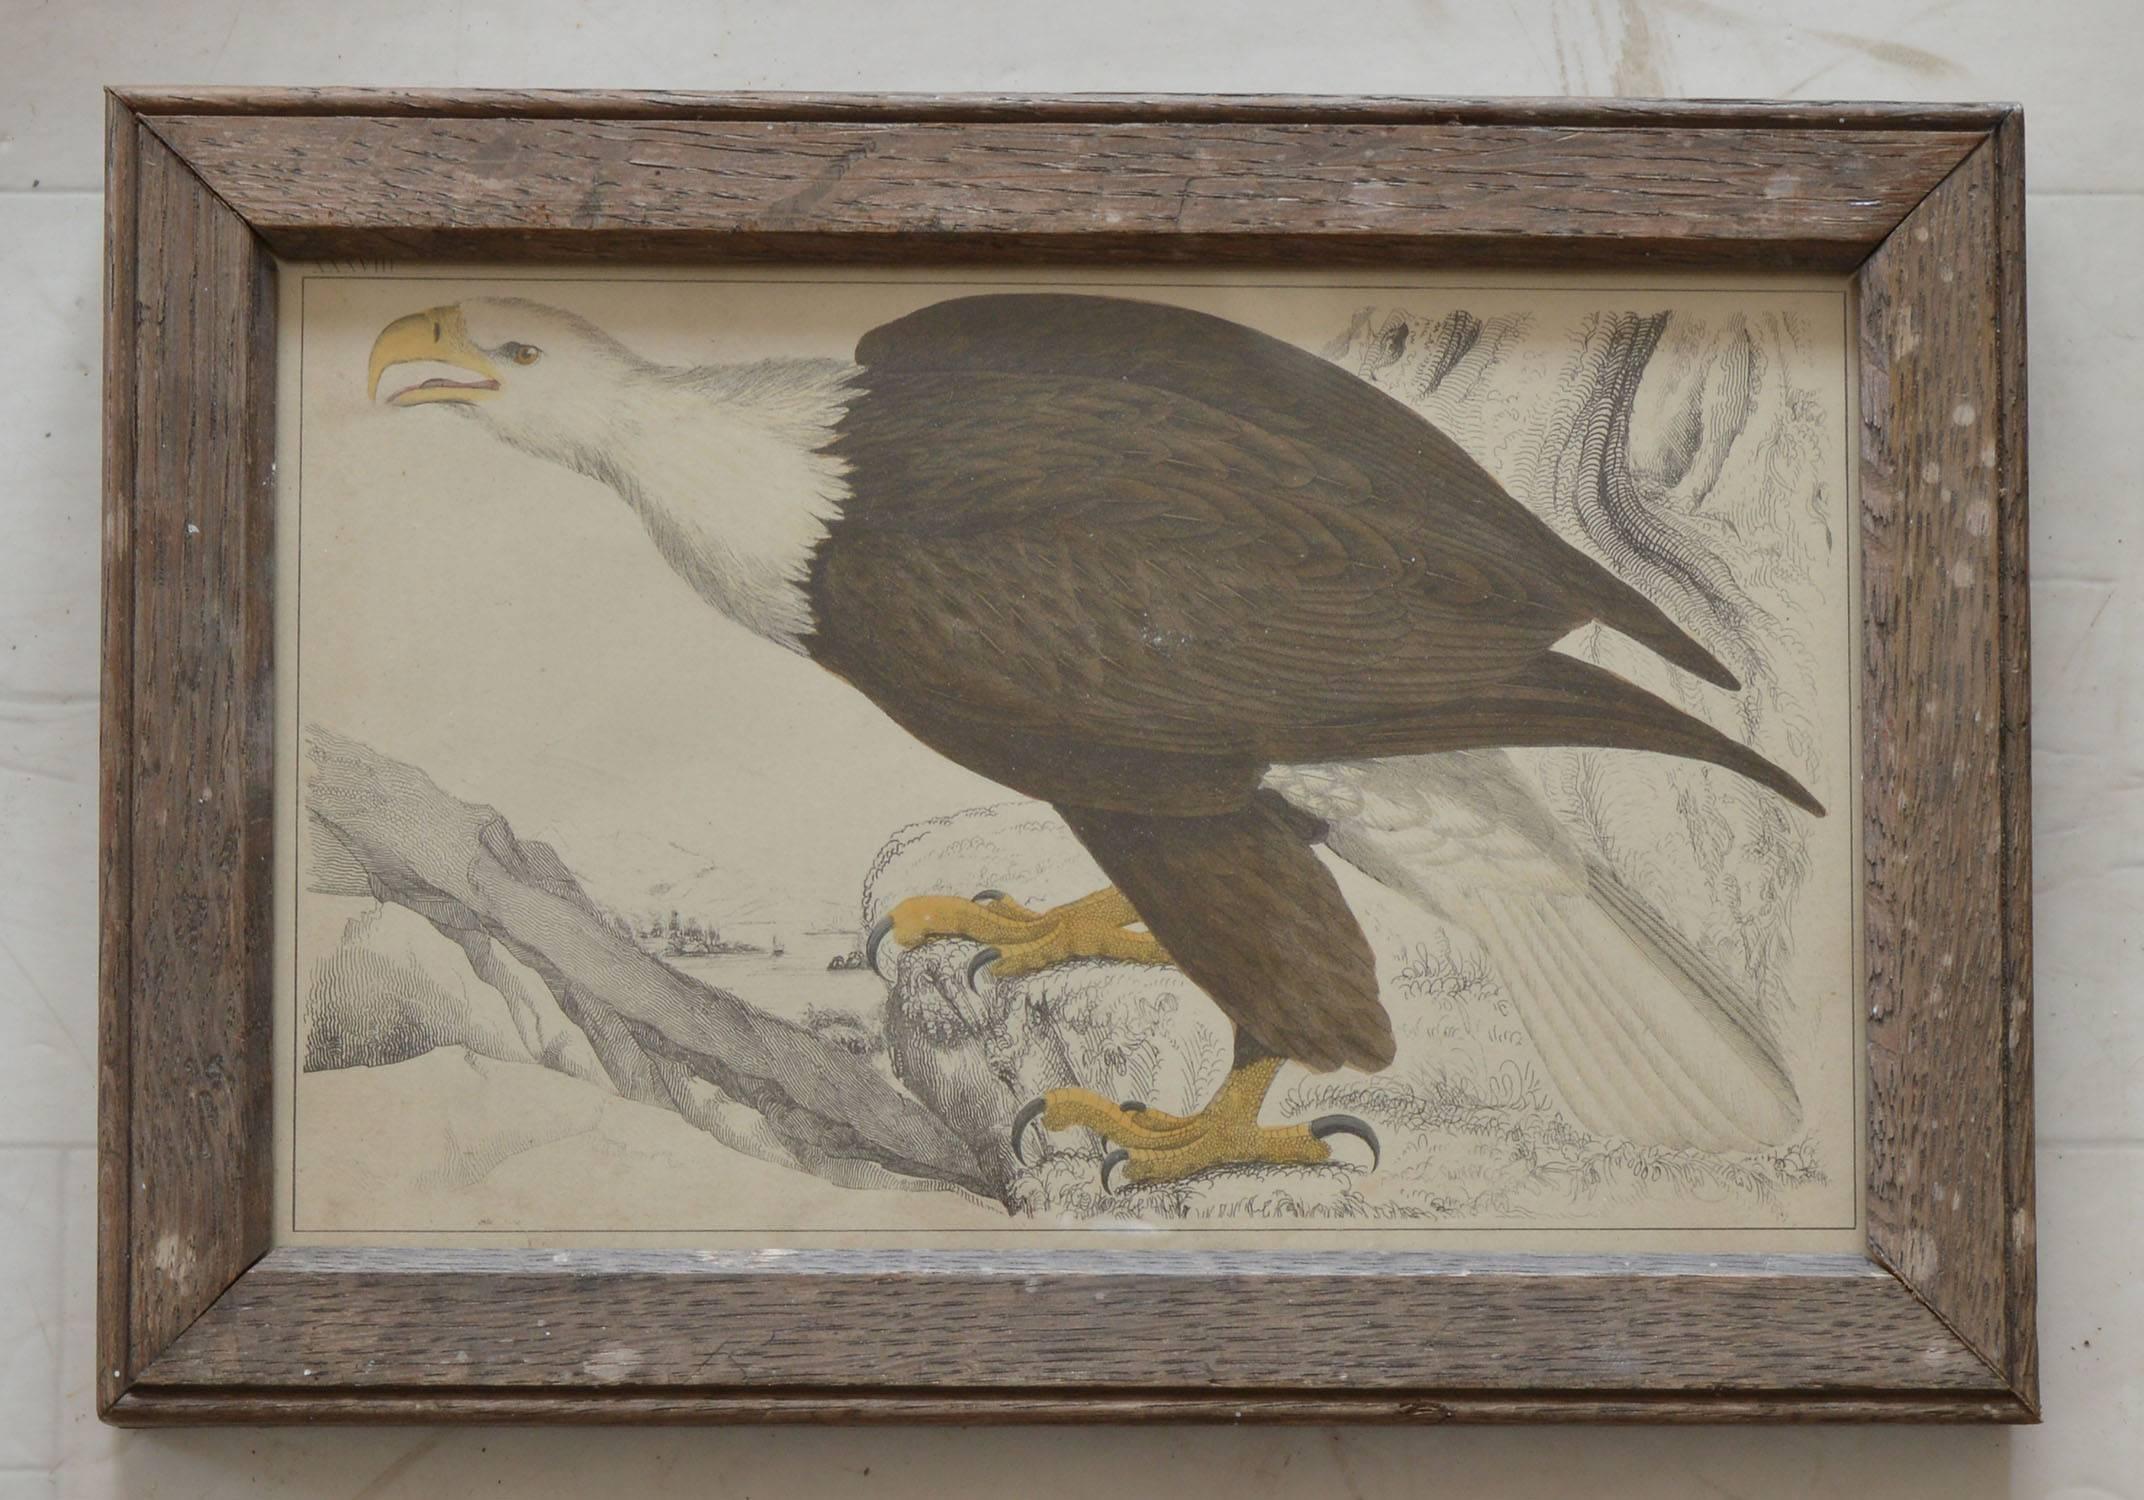 Great image of an eagle.

Hand-colored lithograph.

Original color.

From Goldsmith's Animated Nature.

Published by Fullarton, London and Edinburgh, 1847.

Presented in an antique bleached oak oak frame.

  

